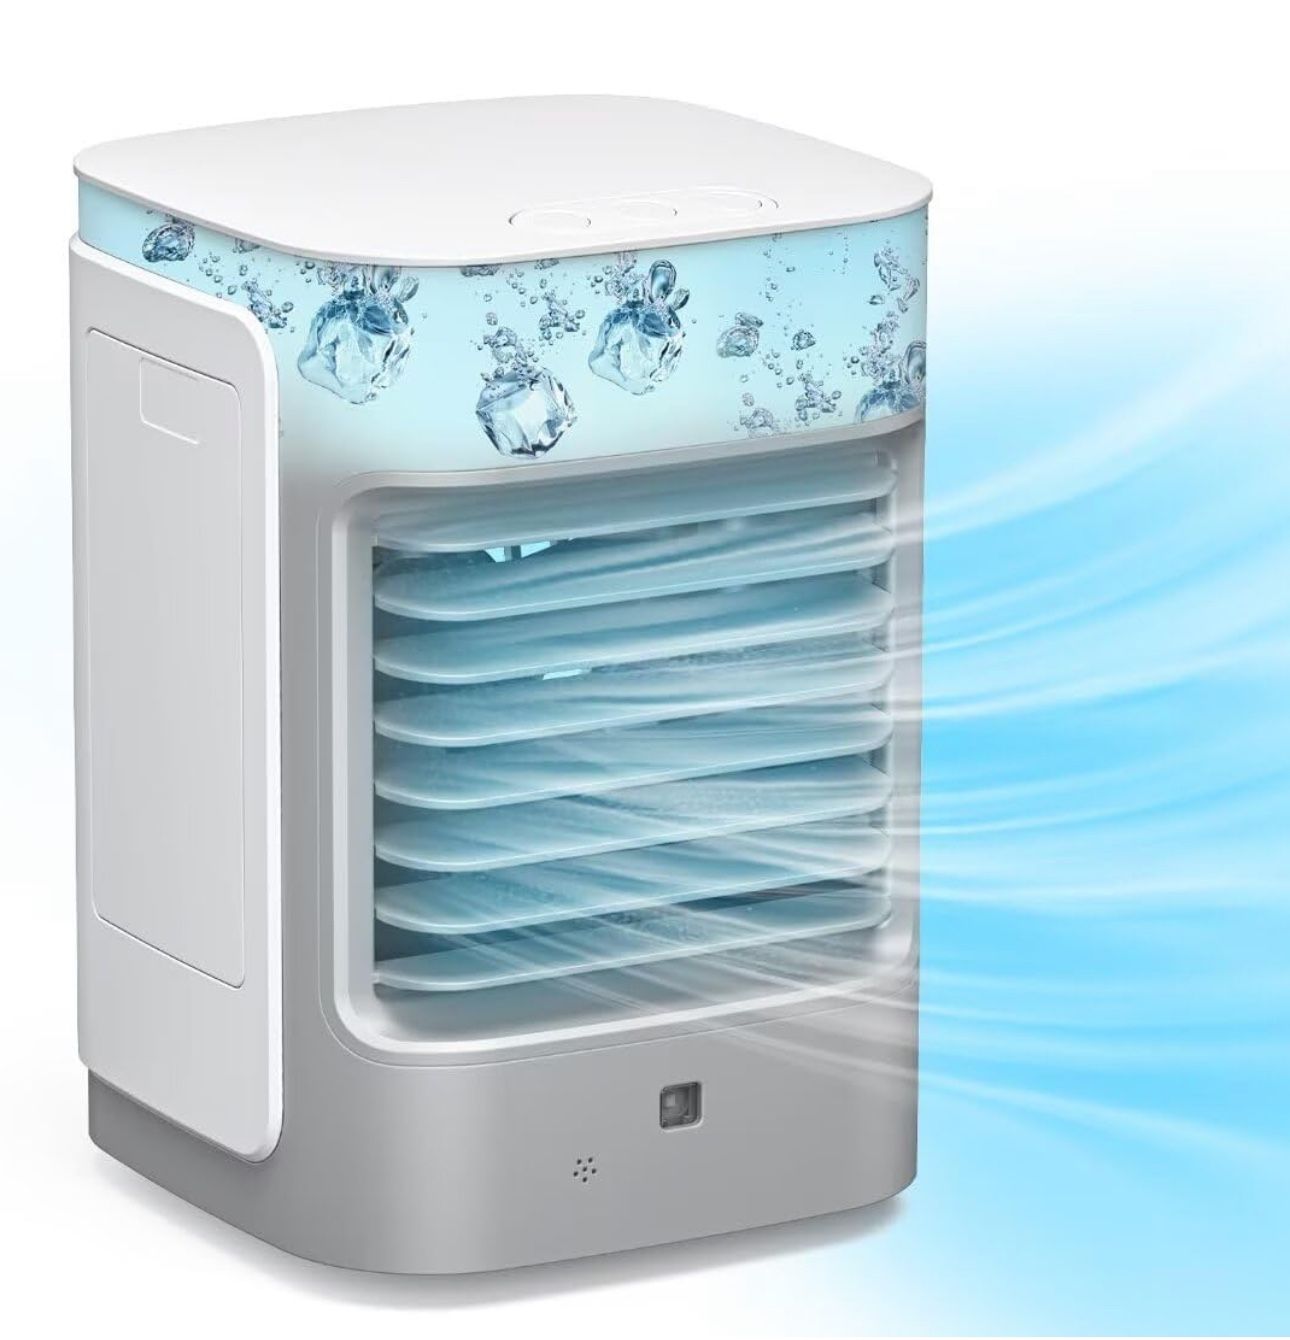 Portable Mini Air Conditioner,3-in-1 Personal Small Ac Unit Cooler, 3 Speed Desk Fan,7 Colors Light Swamp Evaporative Windowless Humidifier for Room O